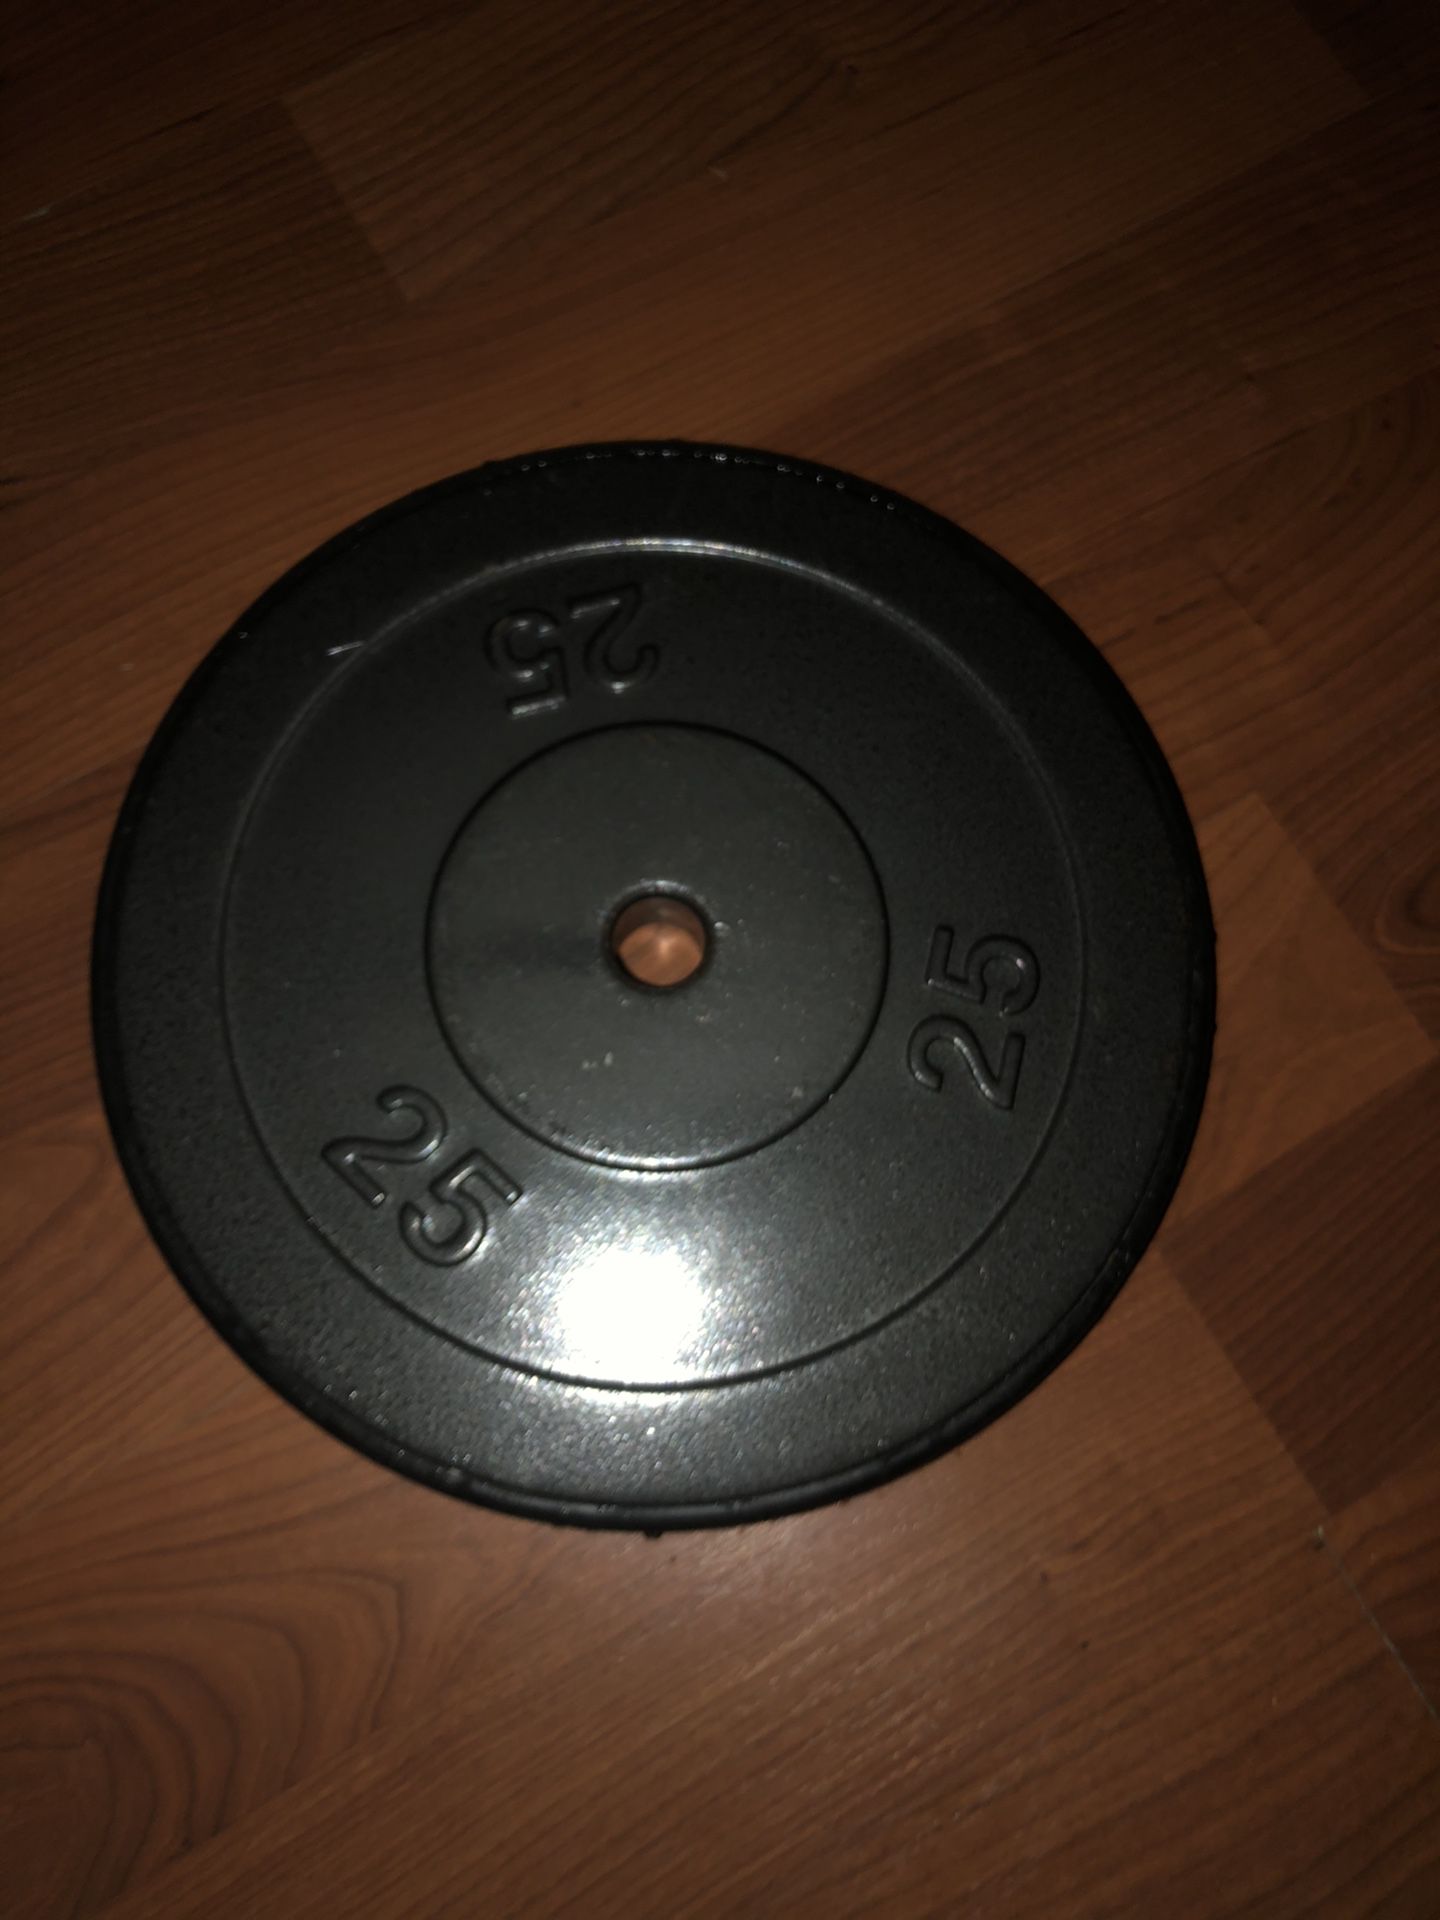 Single 25lb weight plate standard size excellent condition